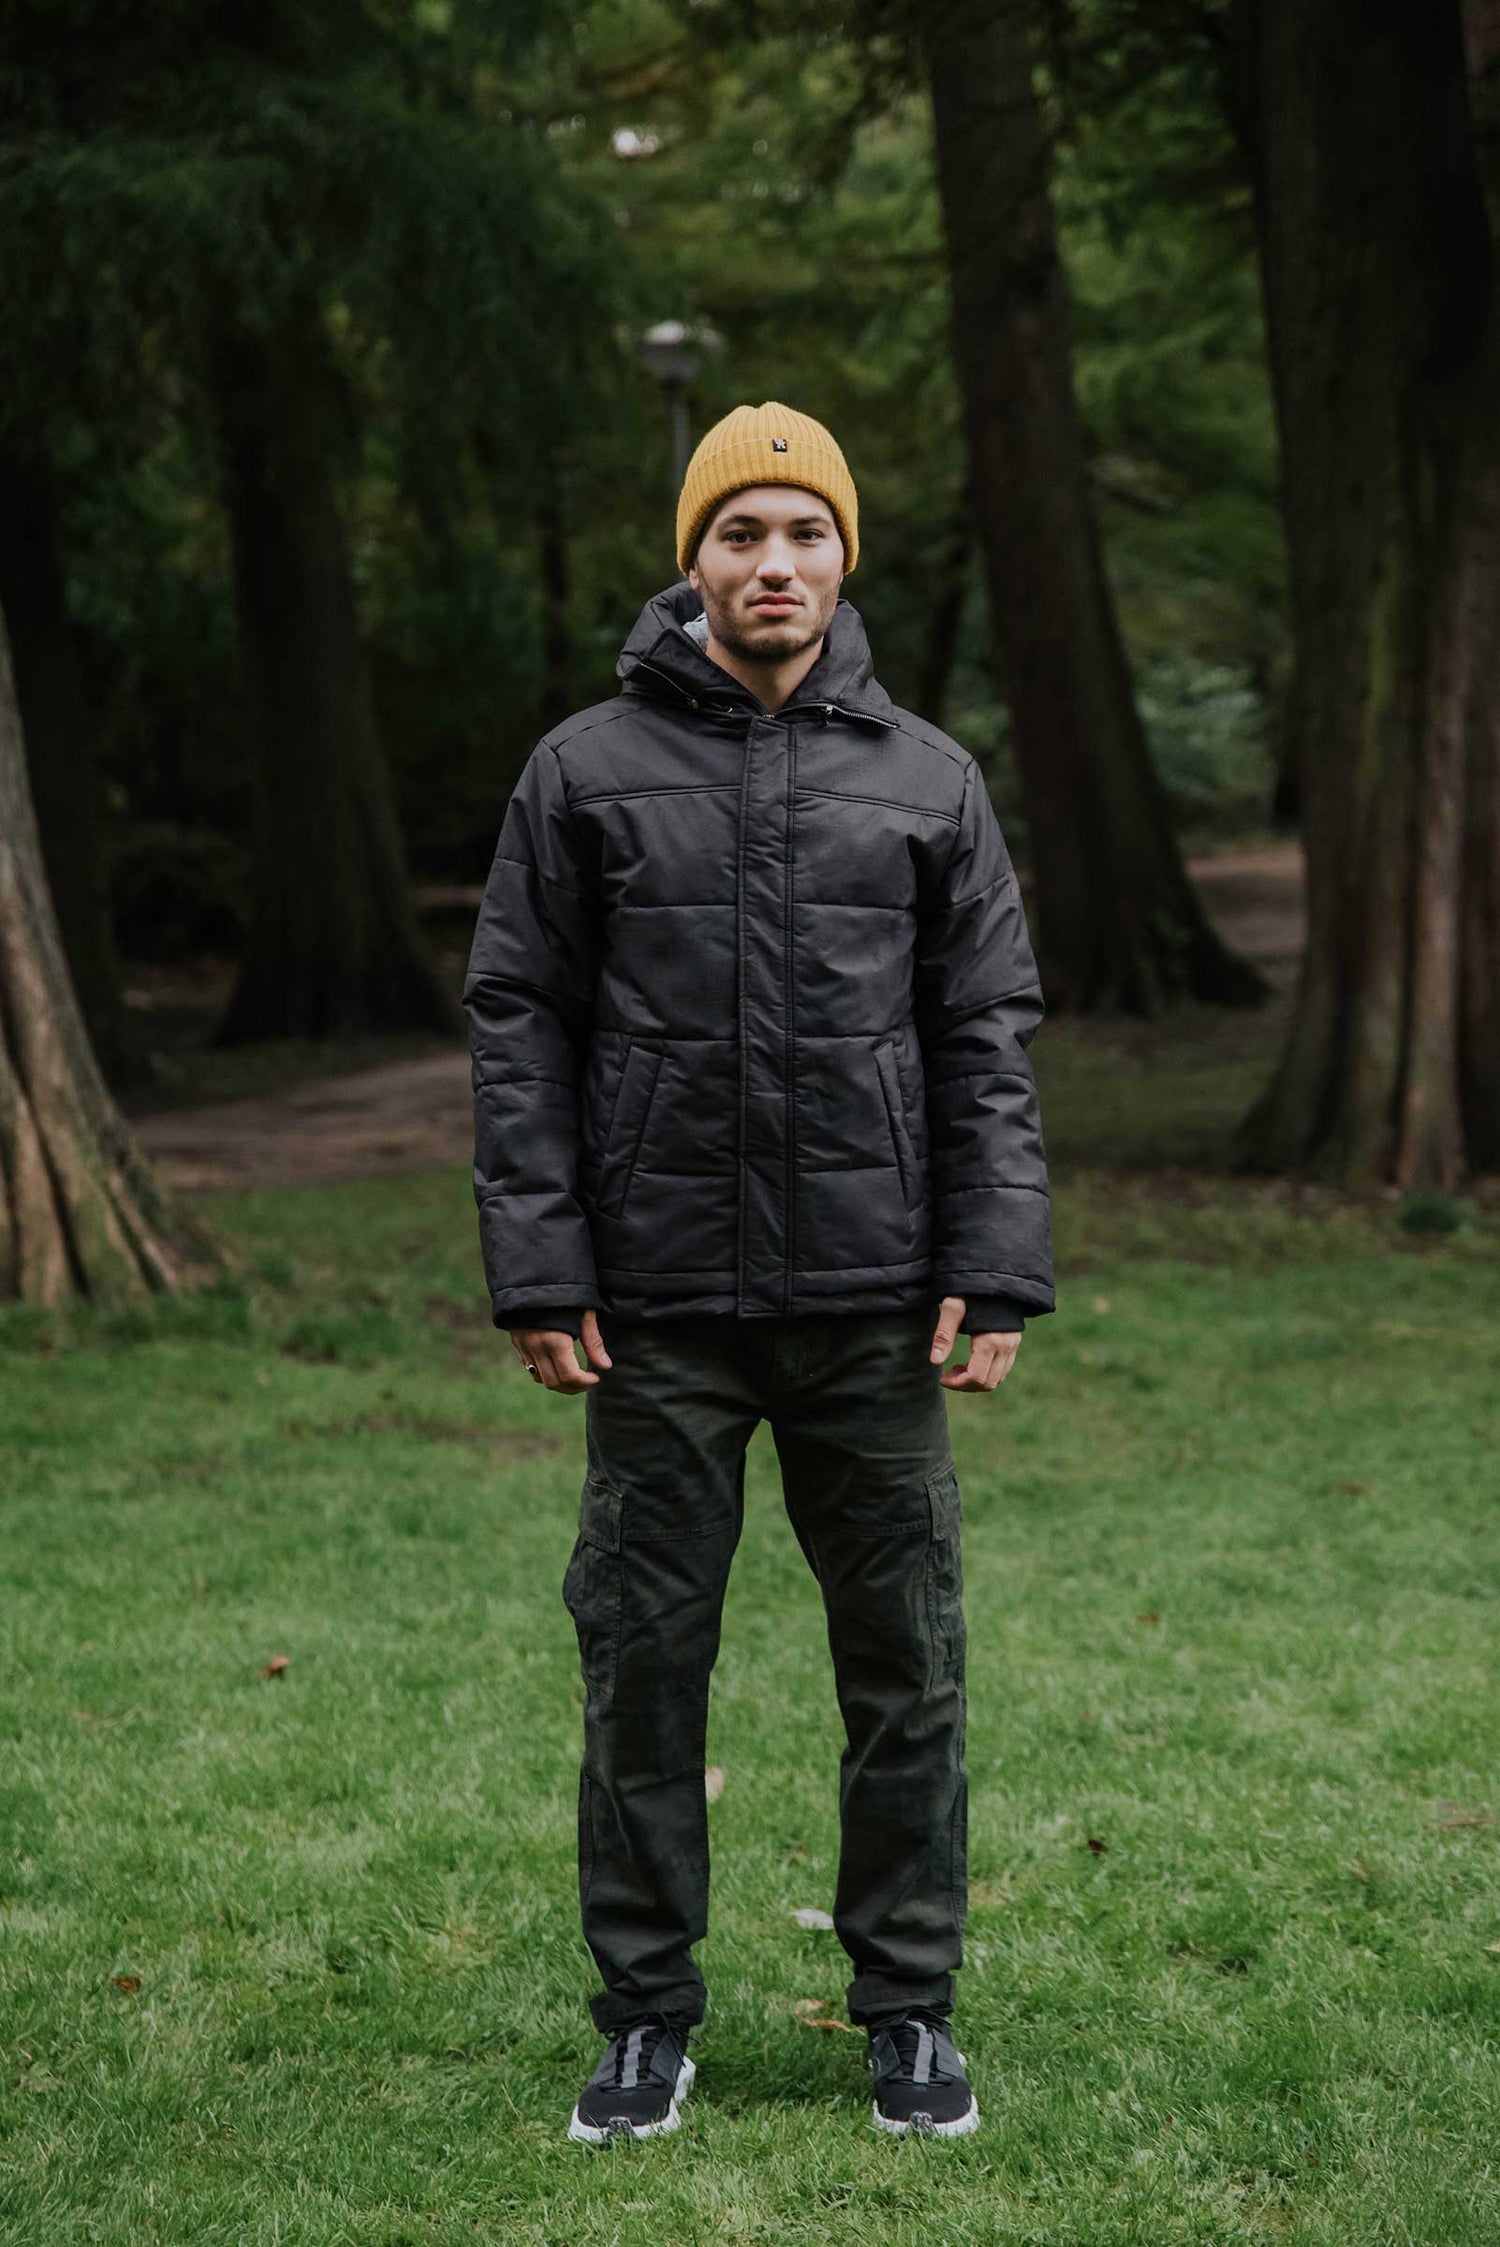 All weather proof sustainable hemp winter jacket, with an adjustable hood, ribbed knit cuffs with thumbholes and zipper windguard to keep the elements out. The soft vegan padding is made from 100% certified recycled plastic bottles, by the innovative Repreve® - Full View